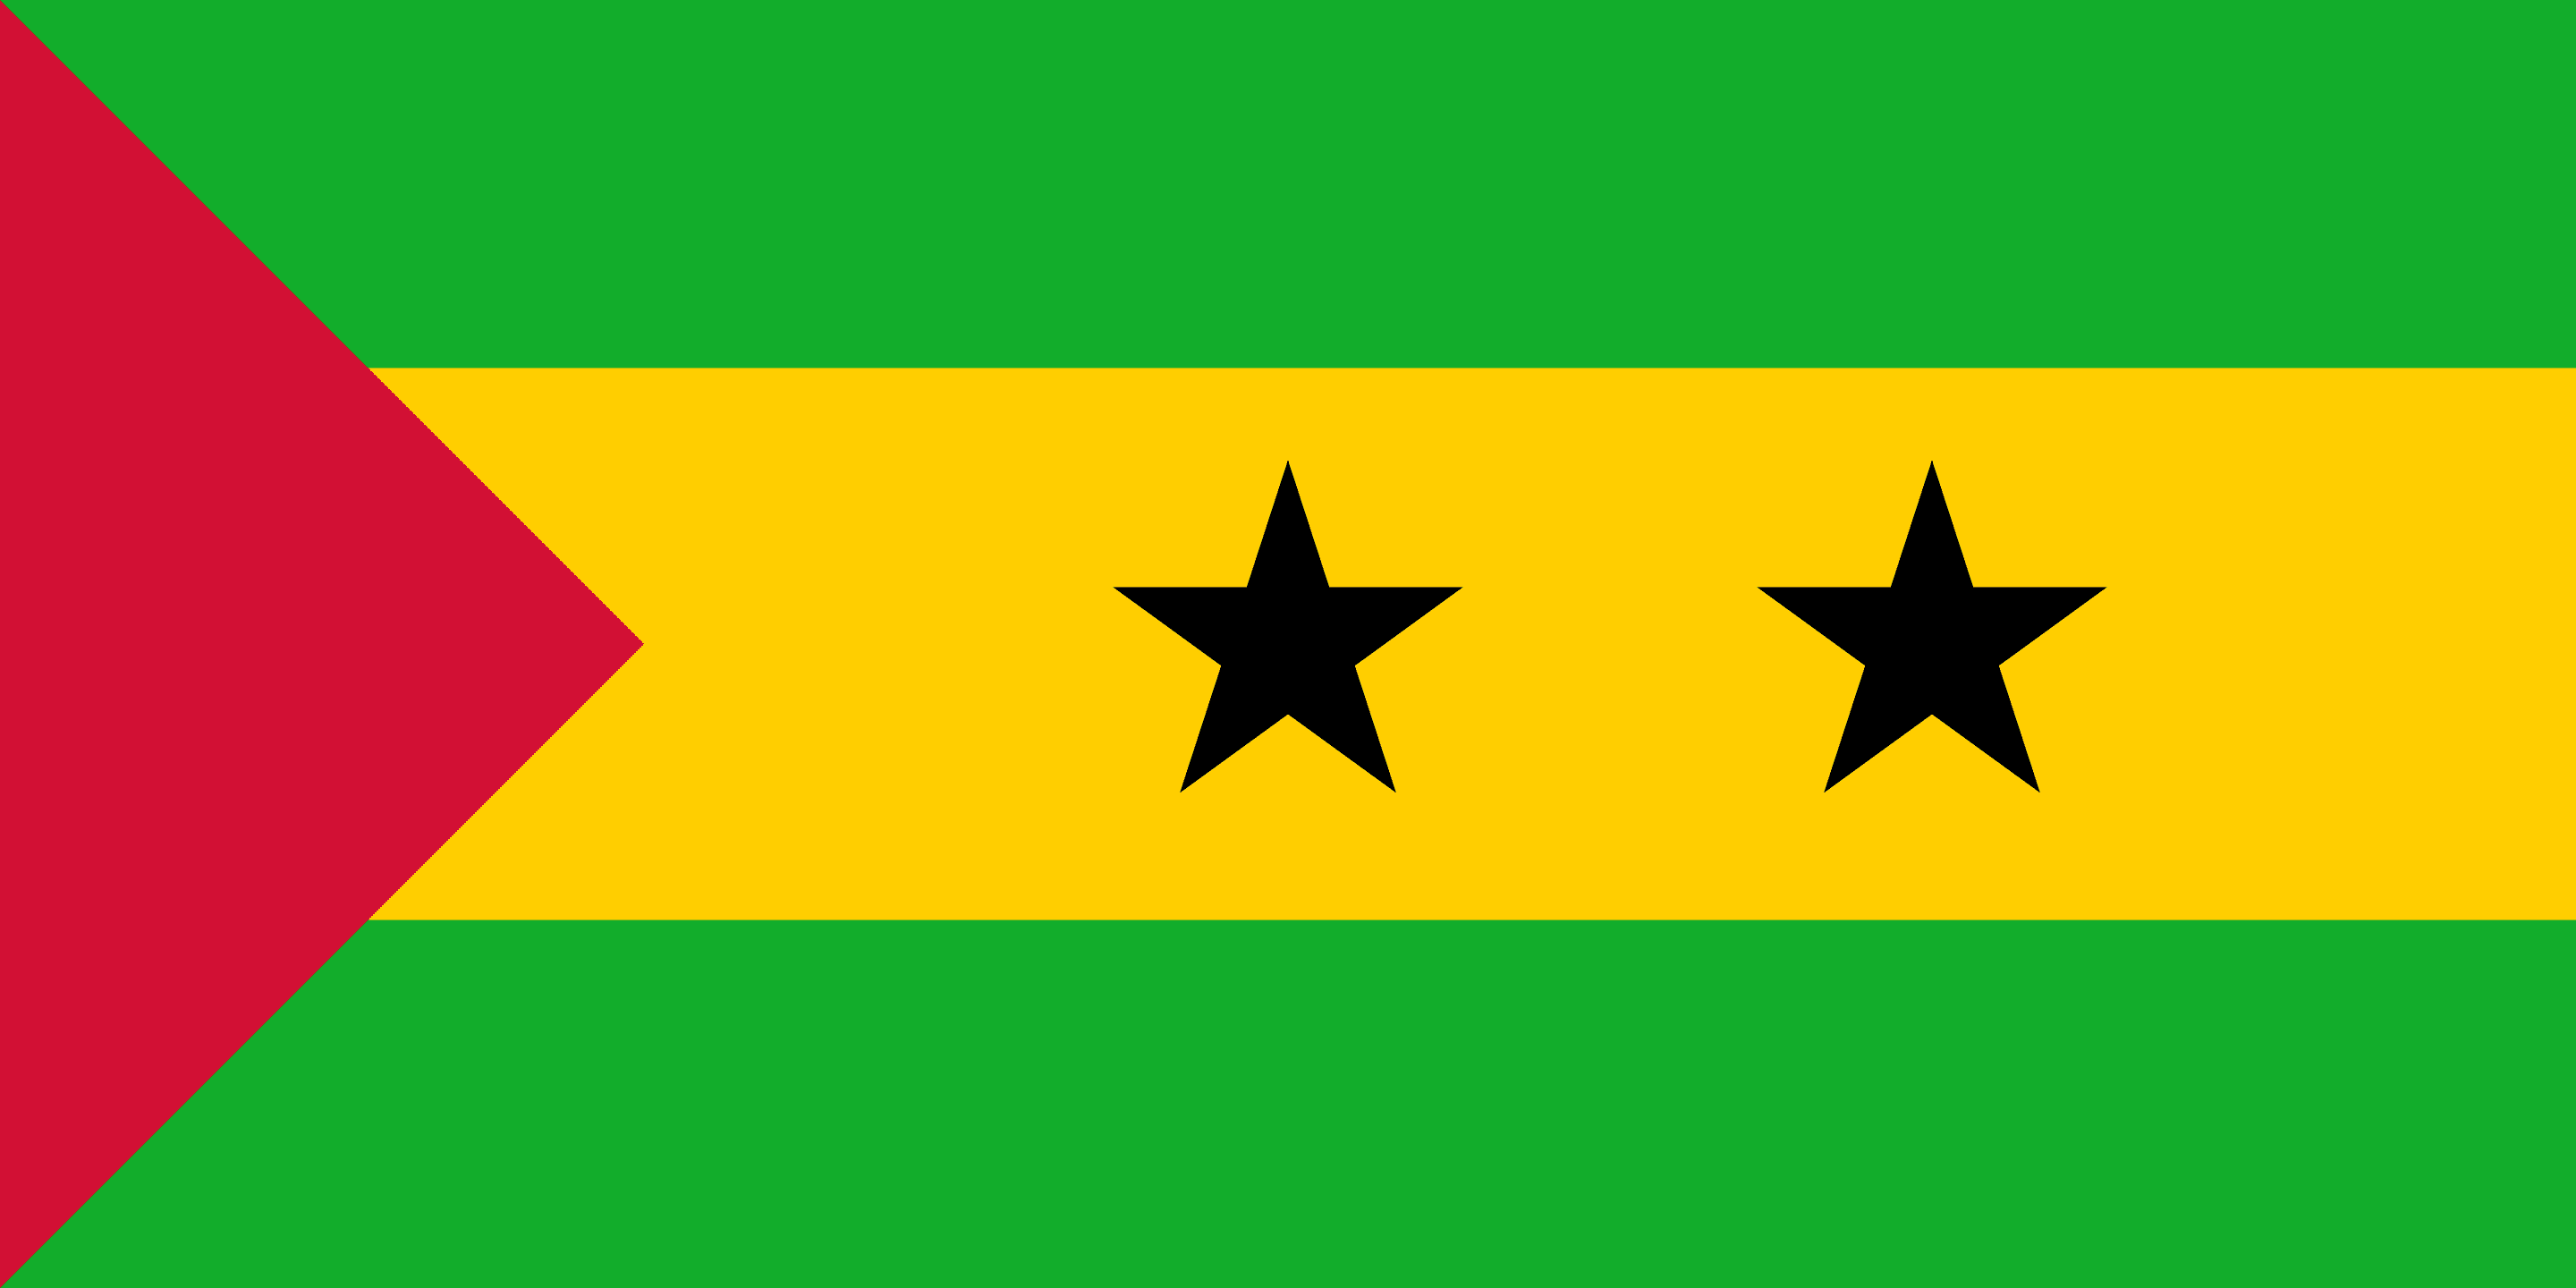 Facts of Sao Tome and Principe